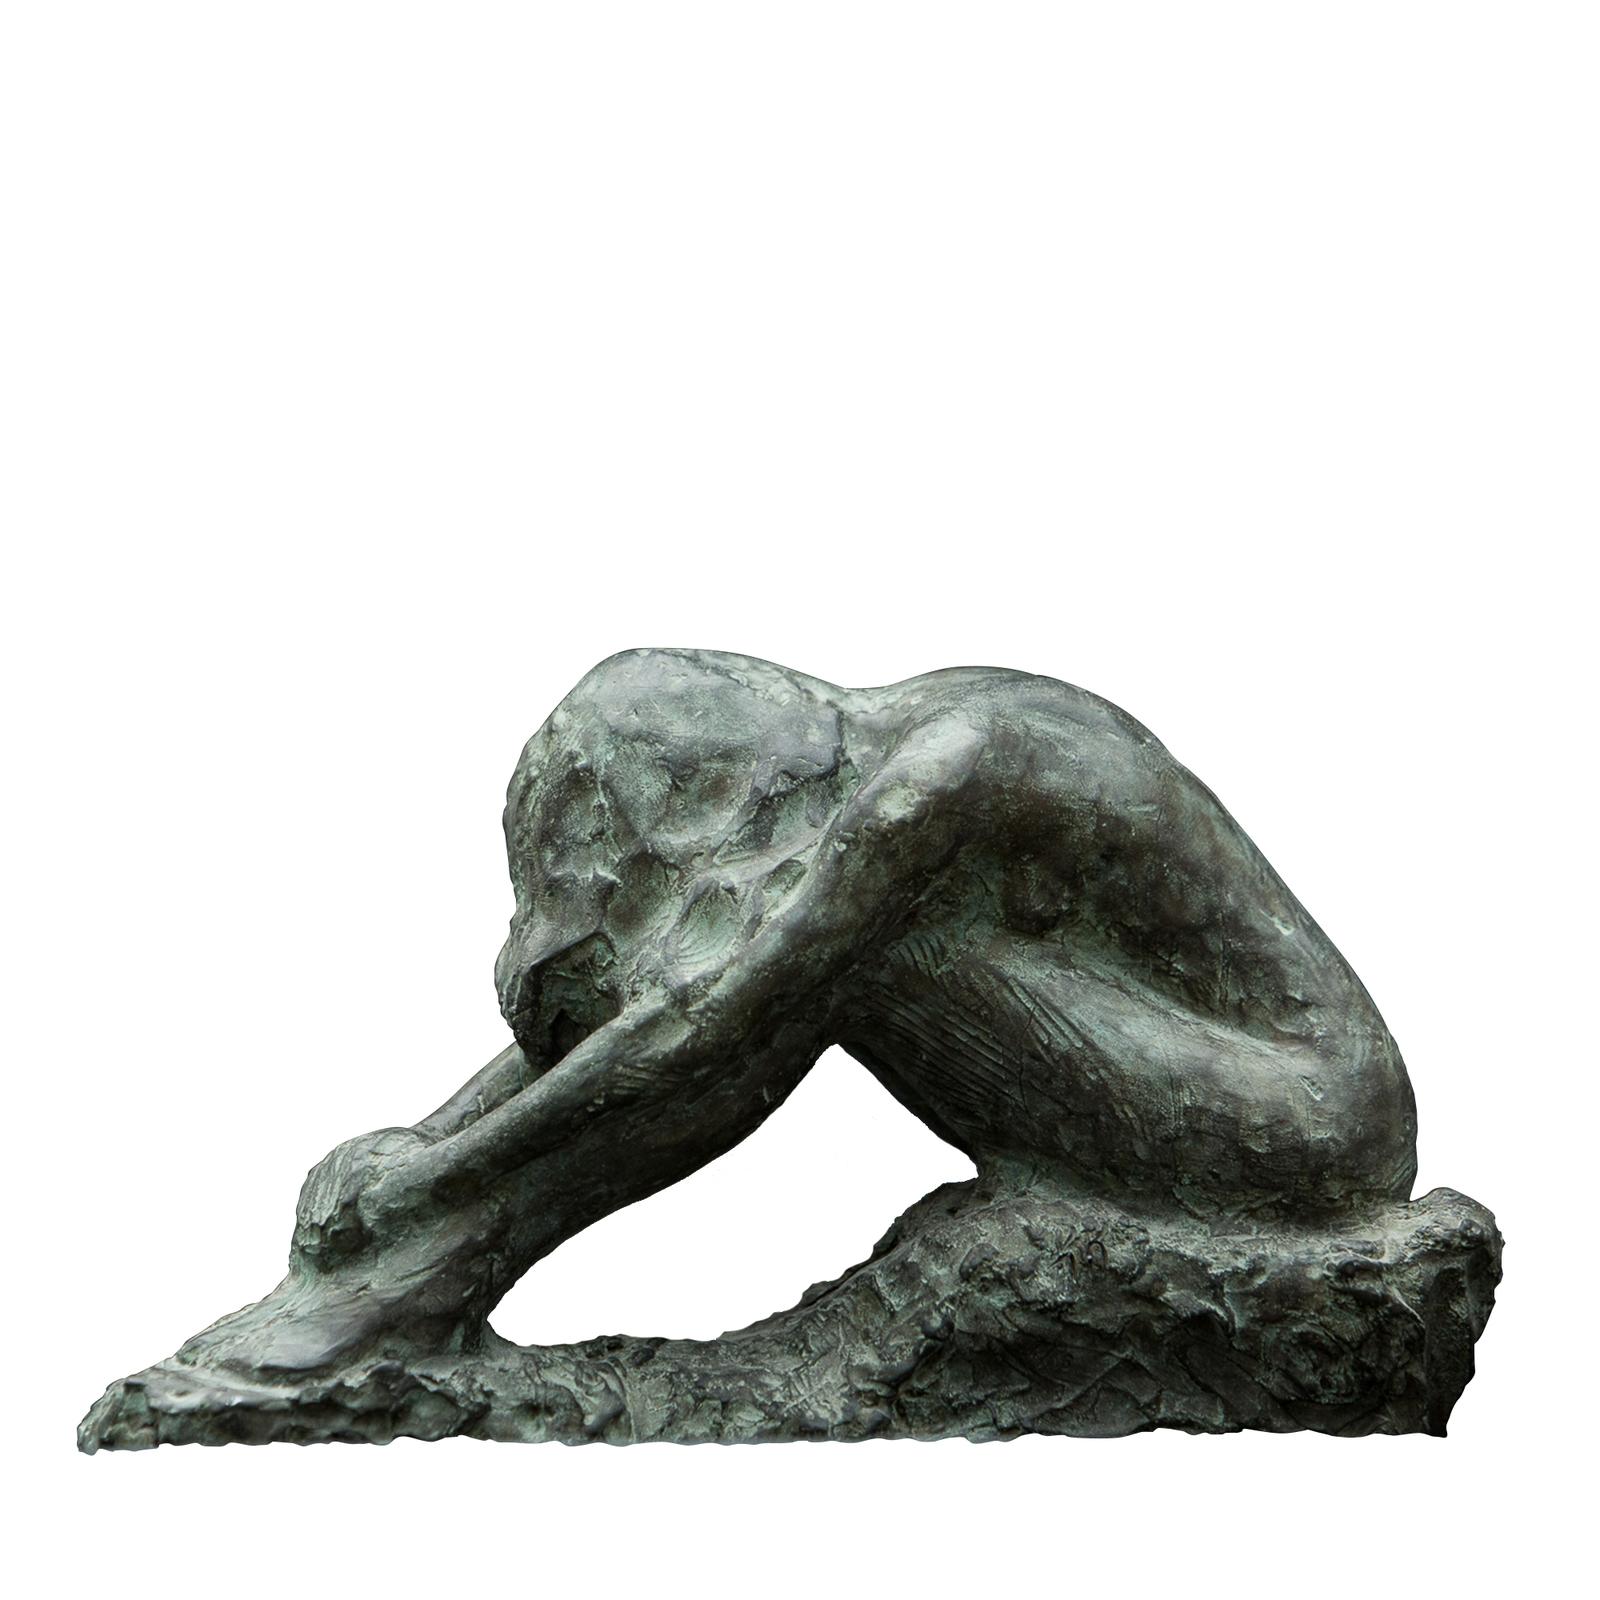 This bronze sculpture is an original piece created in 2004 by Raffaello Romanelli, whose aim was to represent a moment of internal reflection thanks to the position of the body. For the piece, Raffaello Romanelli used a live model in accordance with